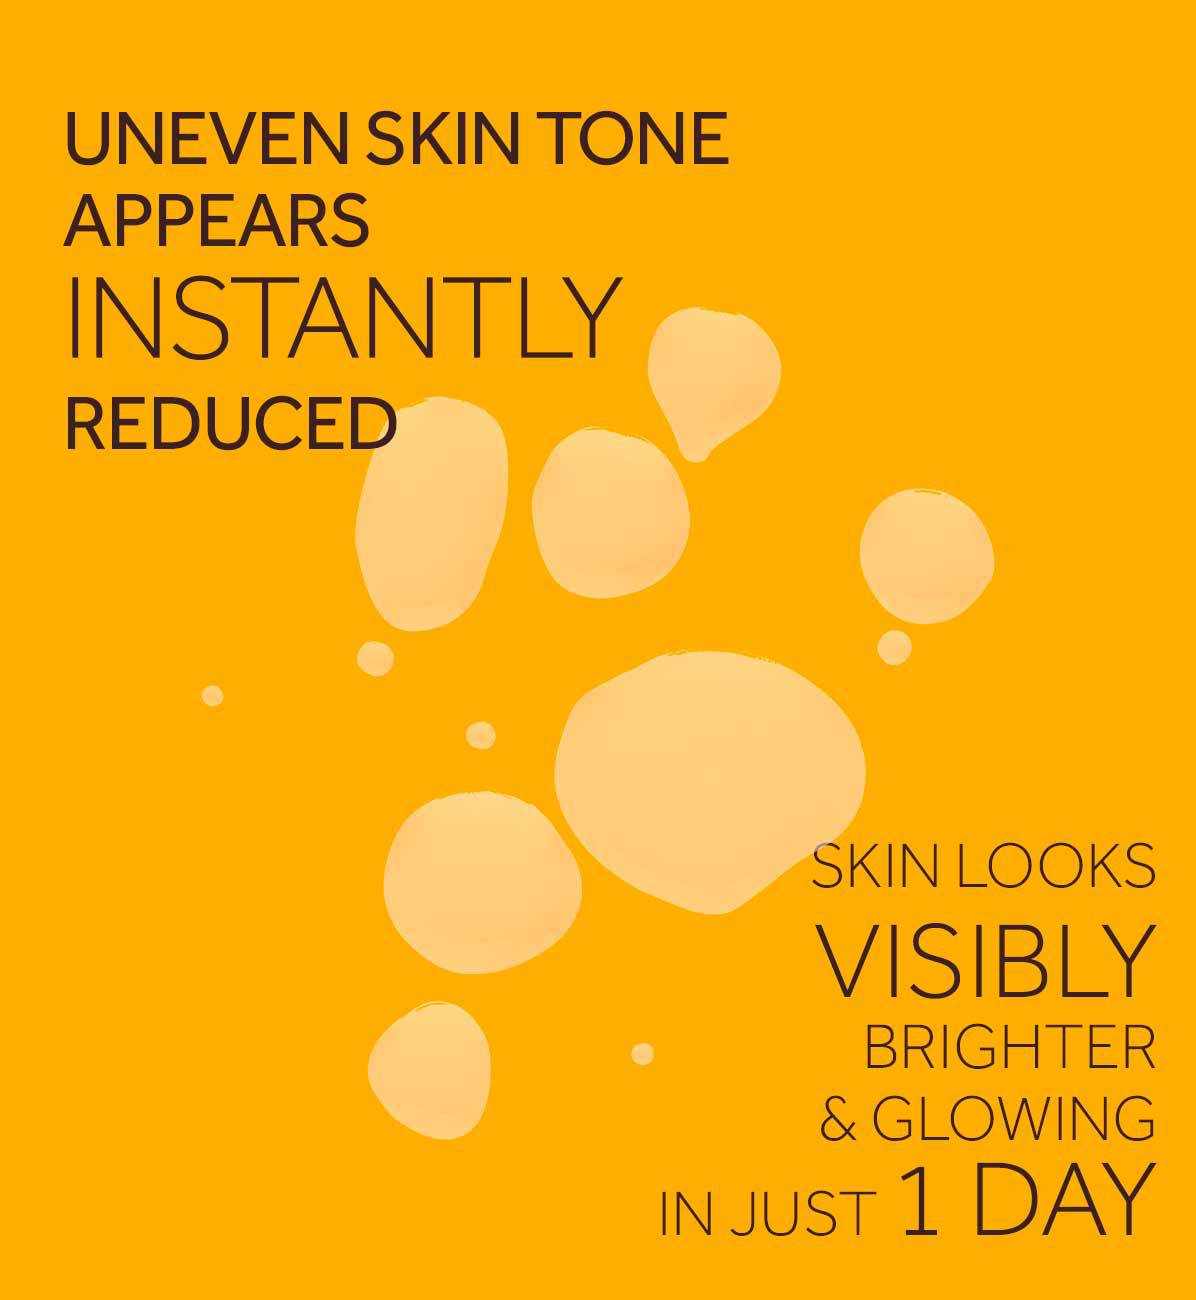 UNEVEN SKIN TONEAPPEARSINSTANTLYREDUCEDSKIN LOOKS VISIBLY BRIGHTER& GLOWINGIN JUST 1 DAY